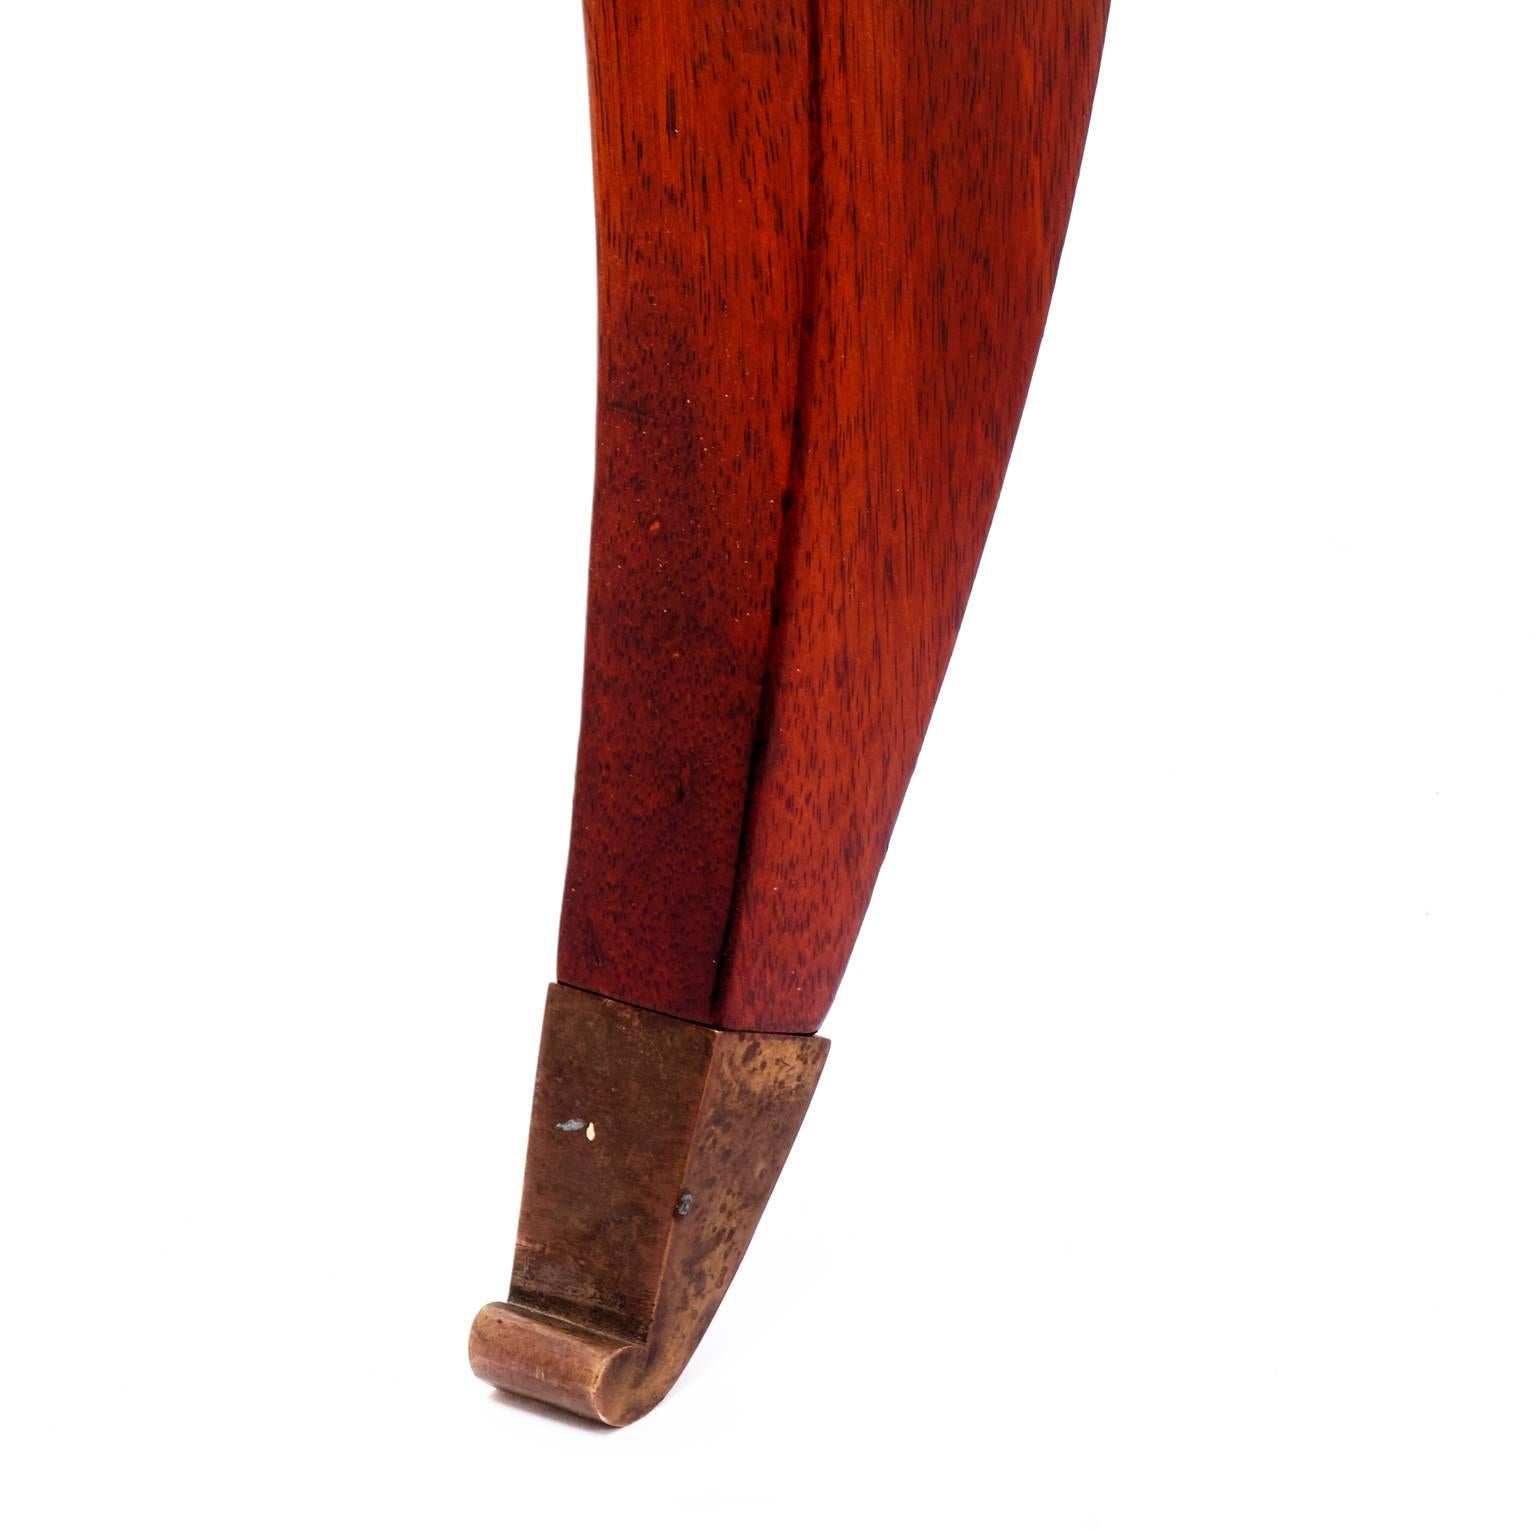 A table on S-shaped legs with brass caps made from polished walnut. Probably from Gino Levi Montalcini from the 1940s. The apron has one drawer which, when closed, sits flush with the apron which is accentuated with a dentil moulding. A new pane of